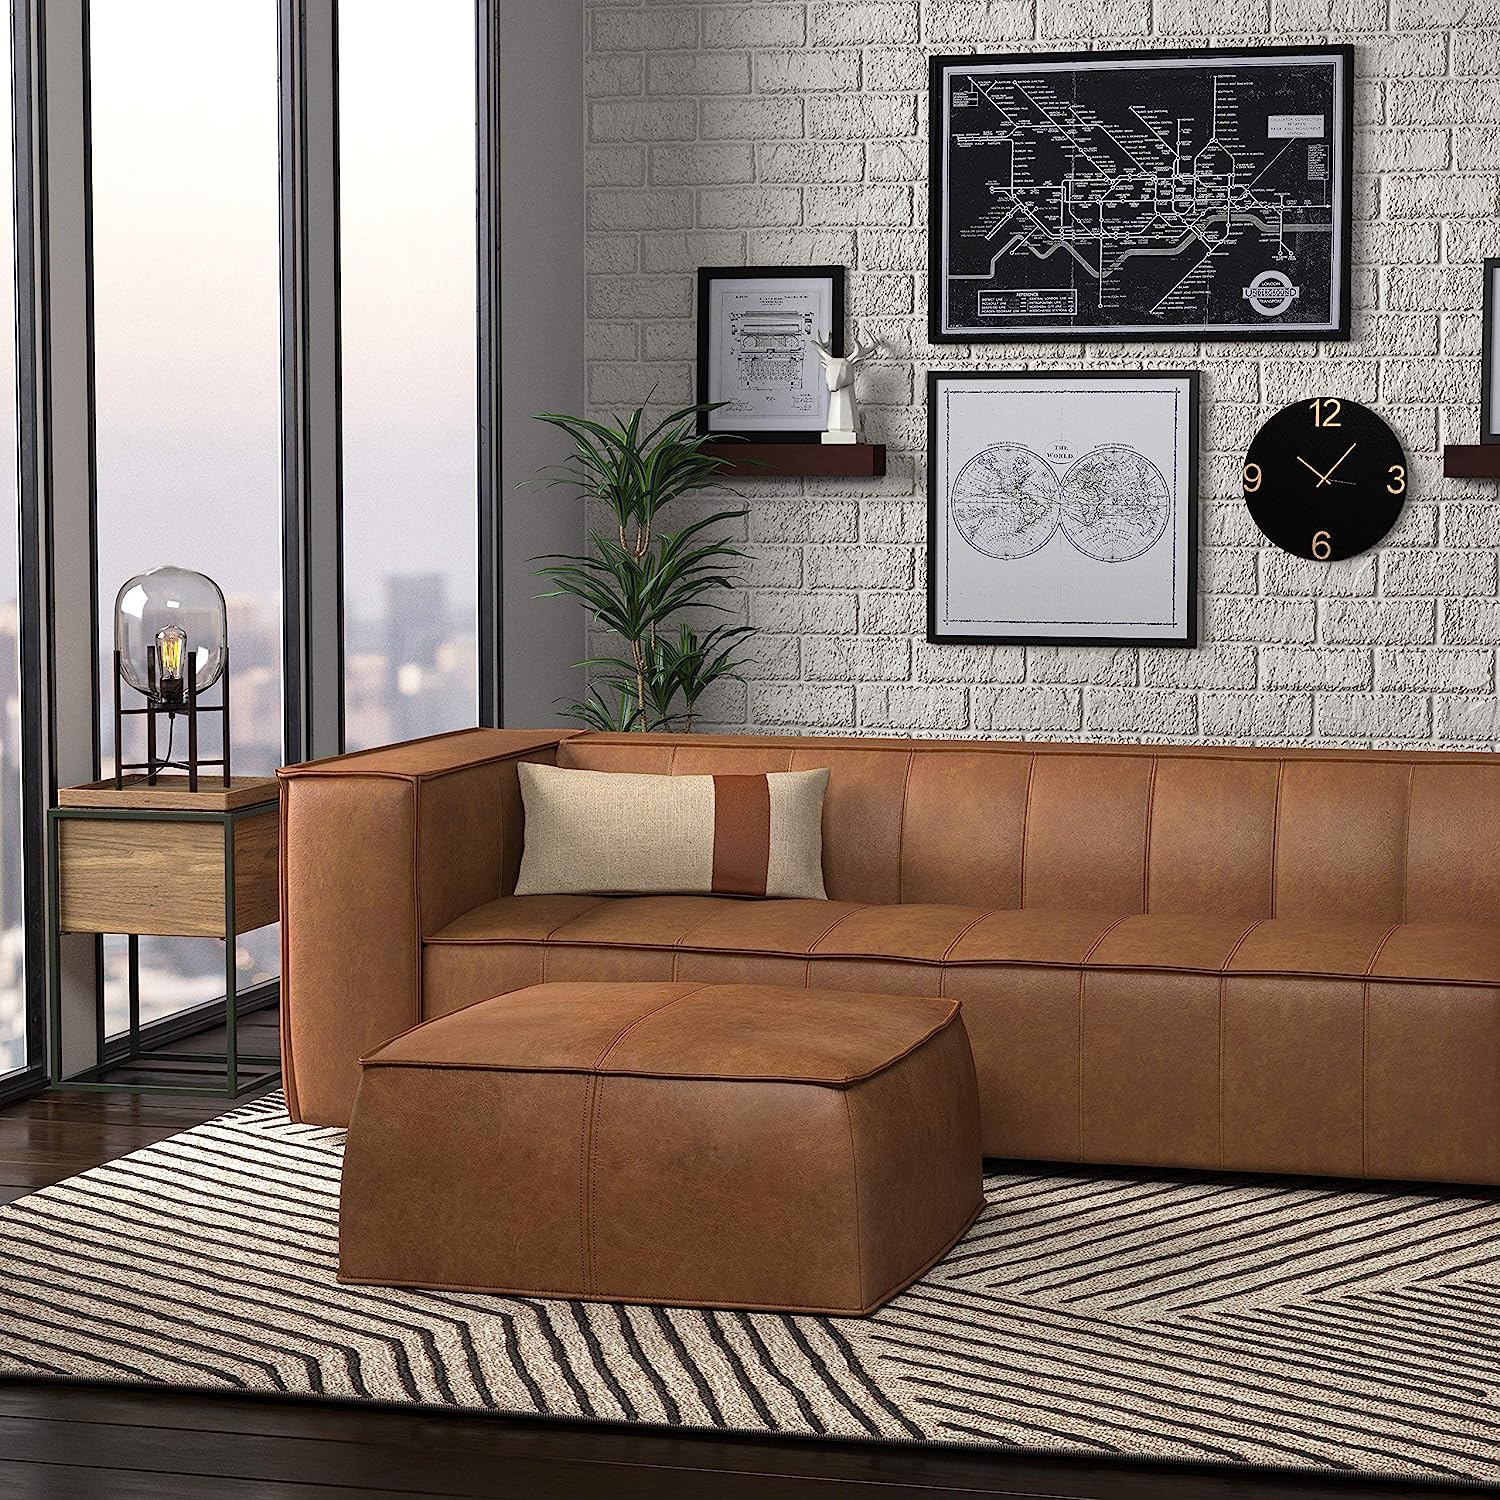 high quality leather square ottoman pouf style footrest for living room cocktail ottoman for sale online genuine leather upholstery medium brown color 36 inch ottomans on amazon